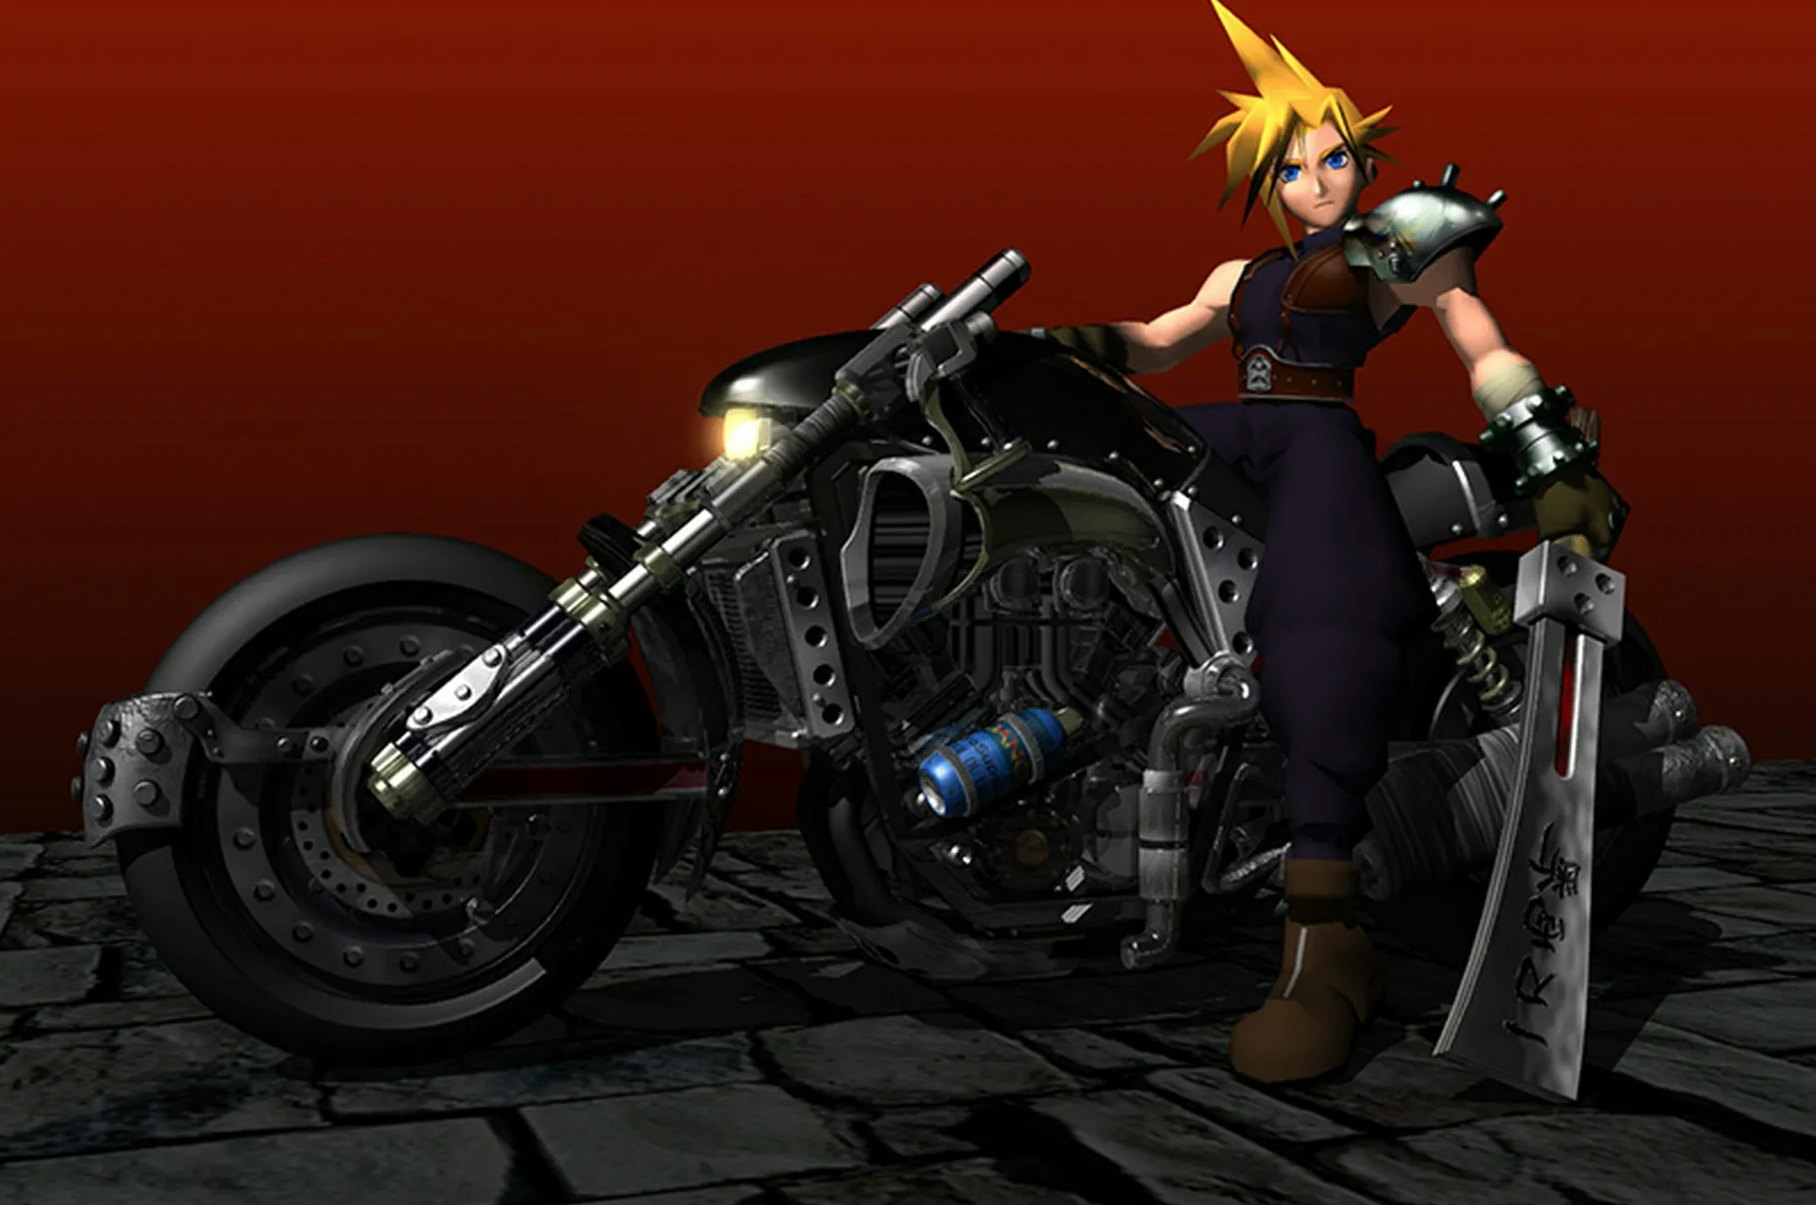 There's only one good way to play the original 'Final Fantasy 7' in 2022